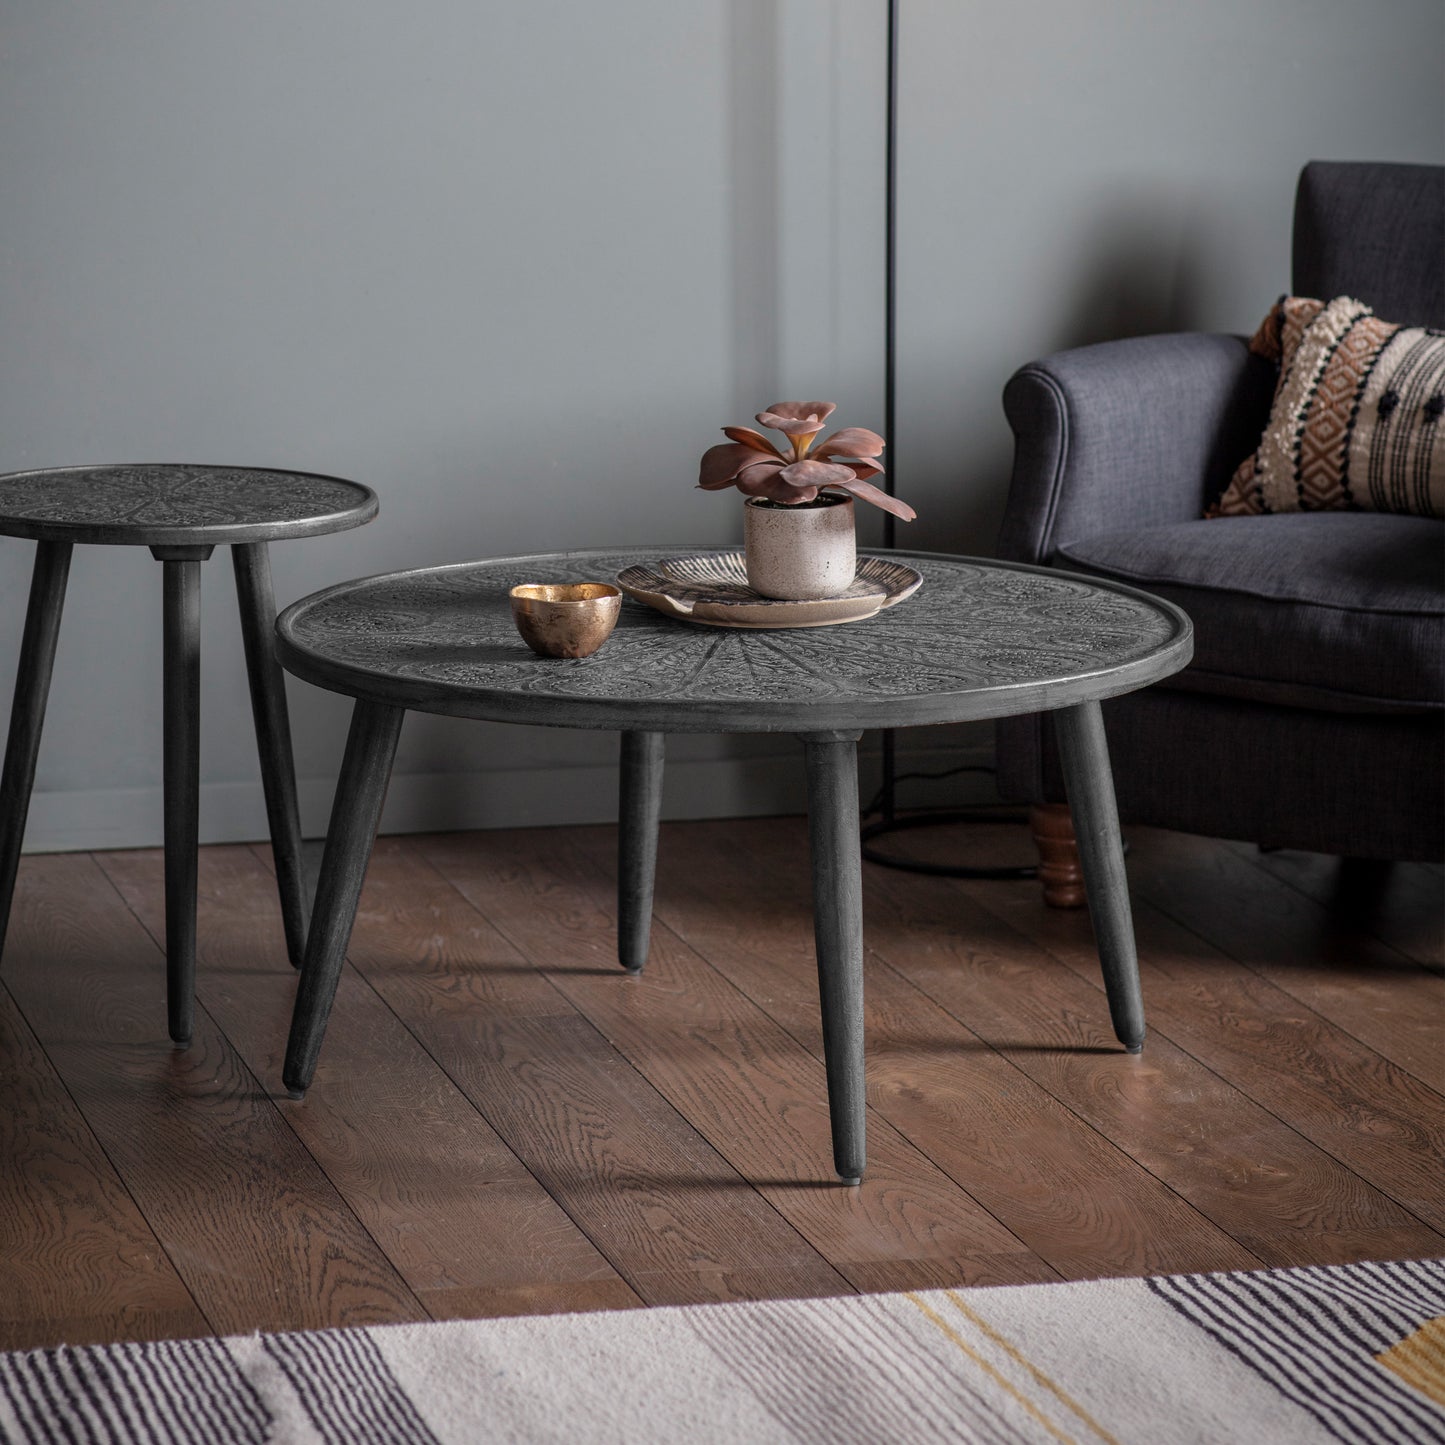 A Bantham Coffee Table Grey Black 910x910x460mm and a side table, perfect for interior decor in a living room, from Kikiathome.co.uk.